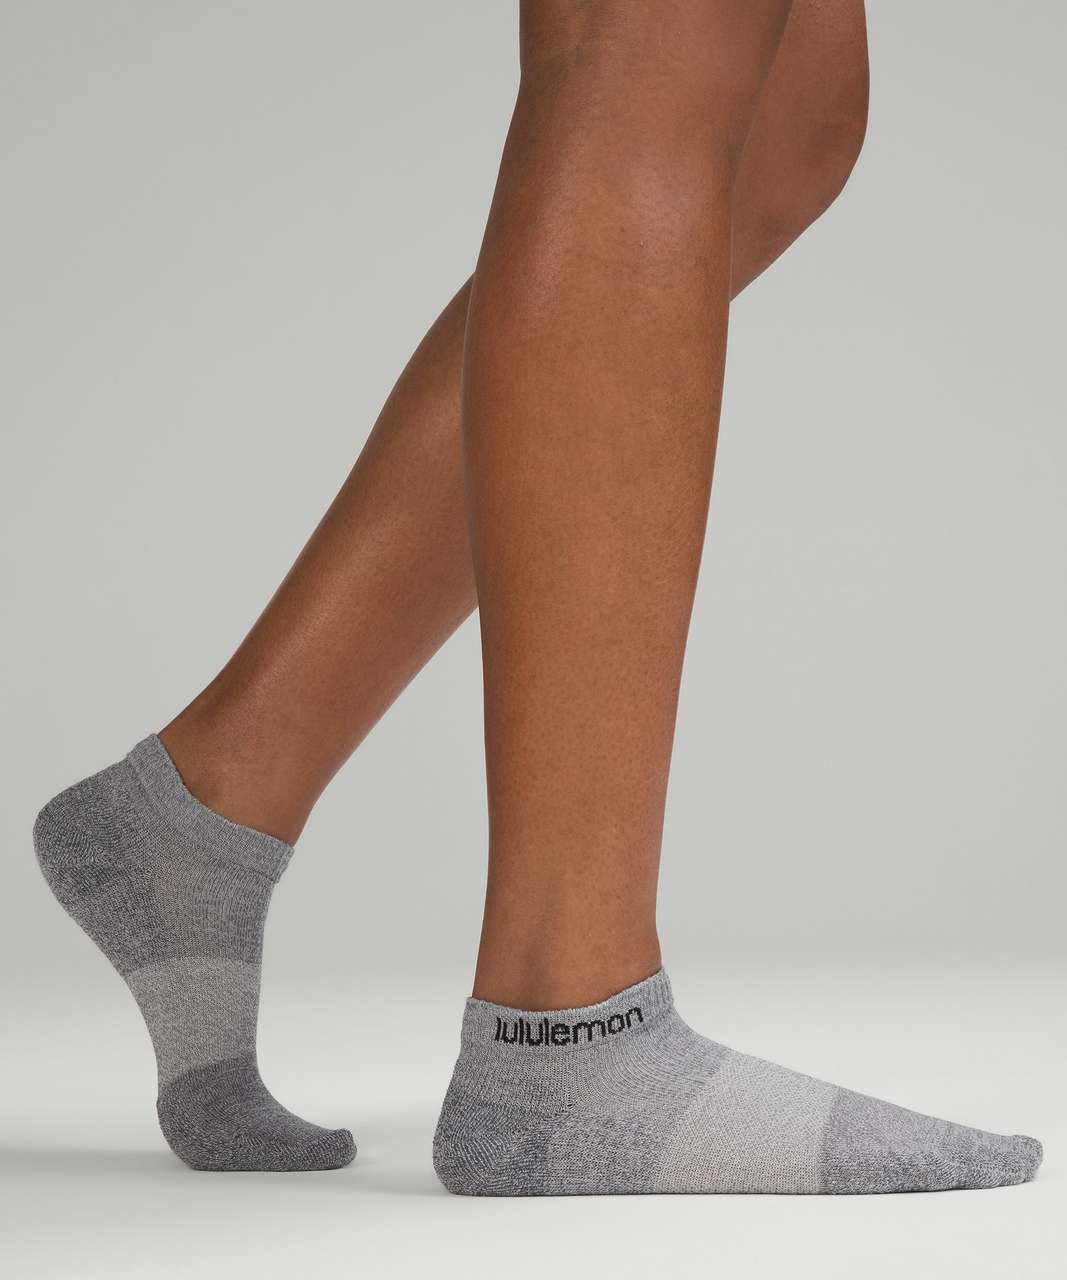 Lululemon Womens Daily Stride Comfort Ankle Sock *3 Pack - Heather Grey